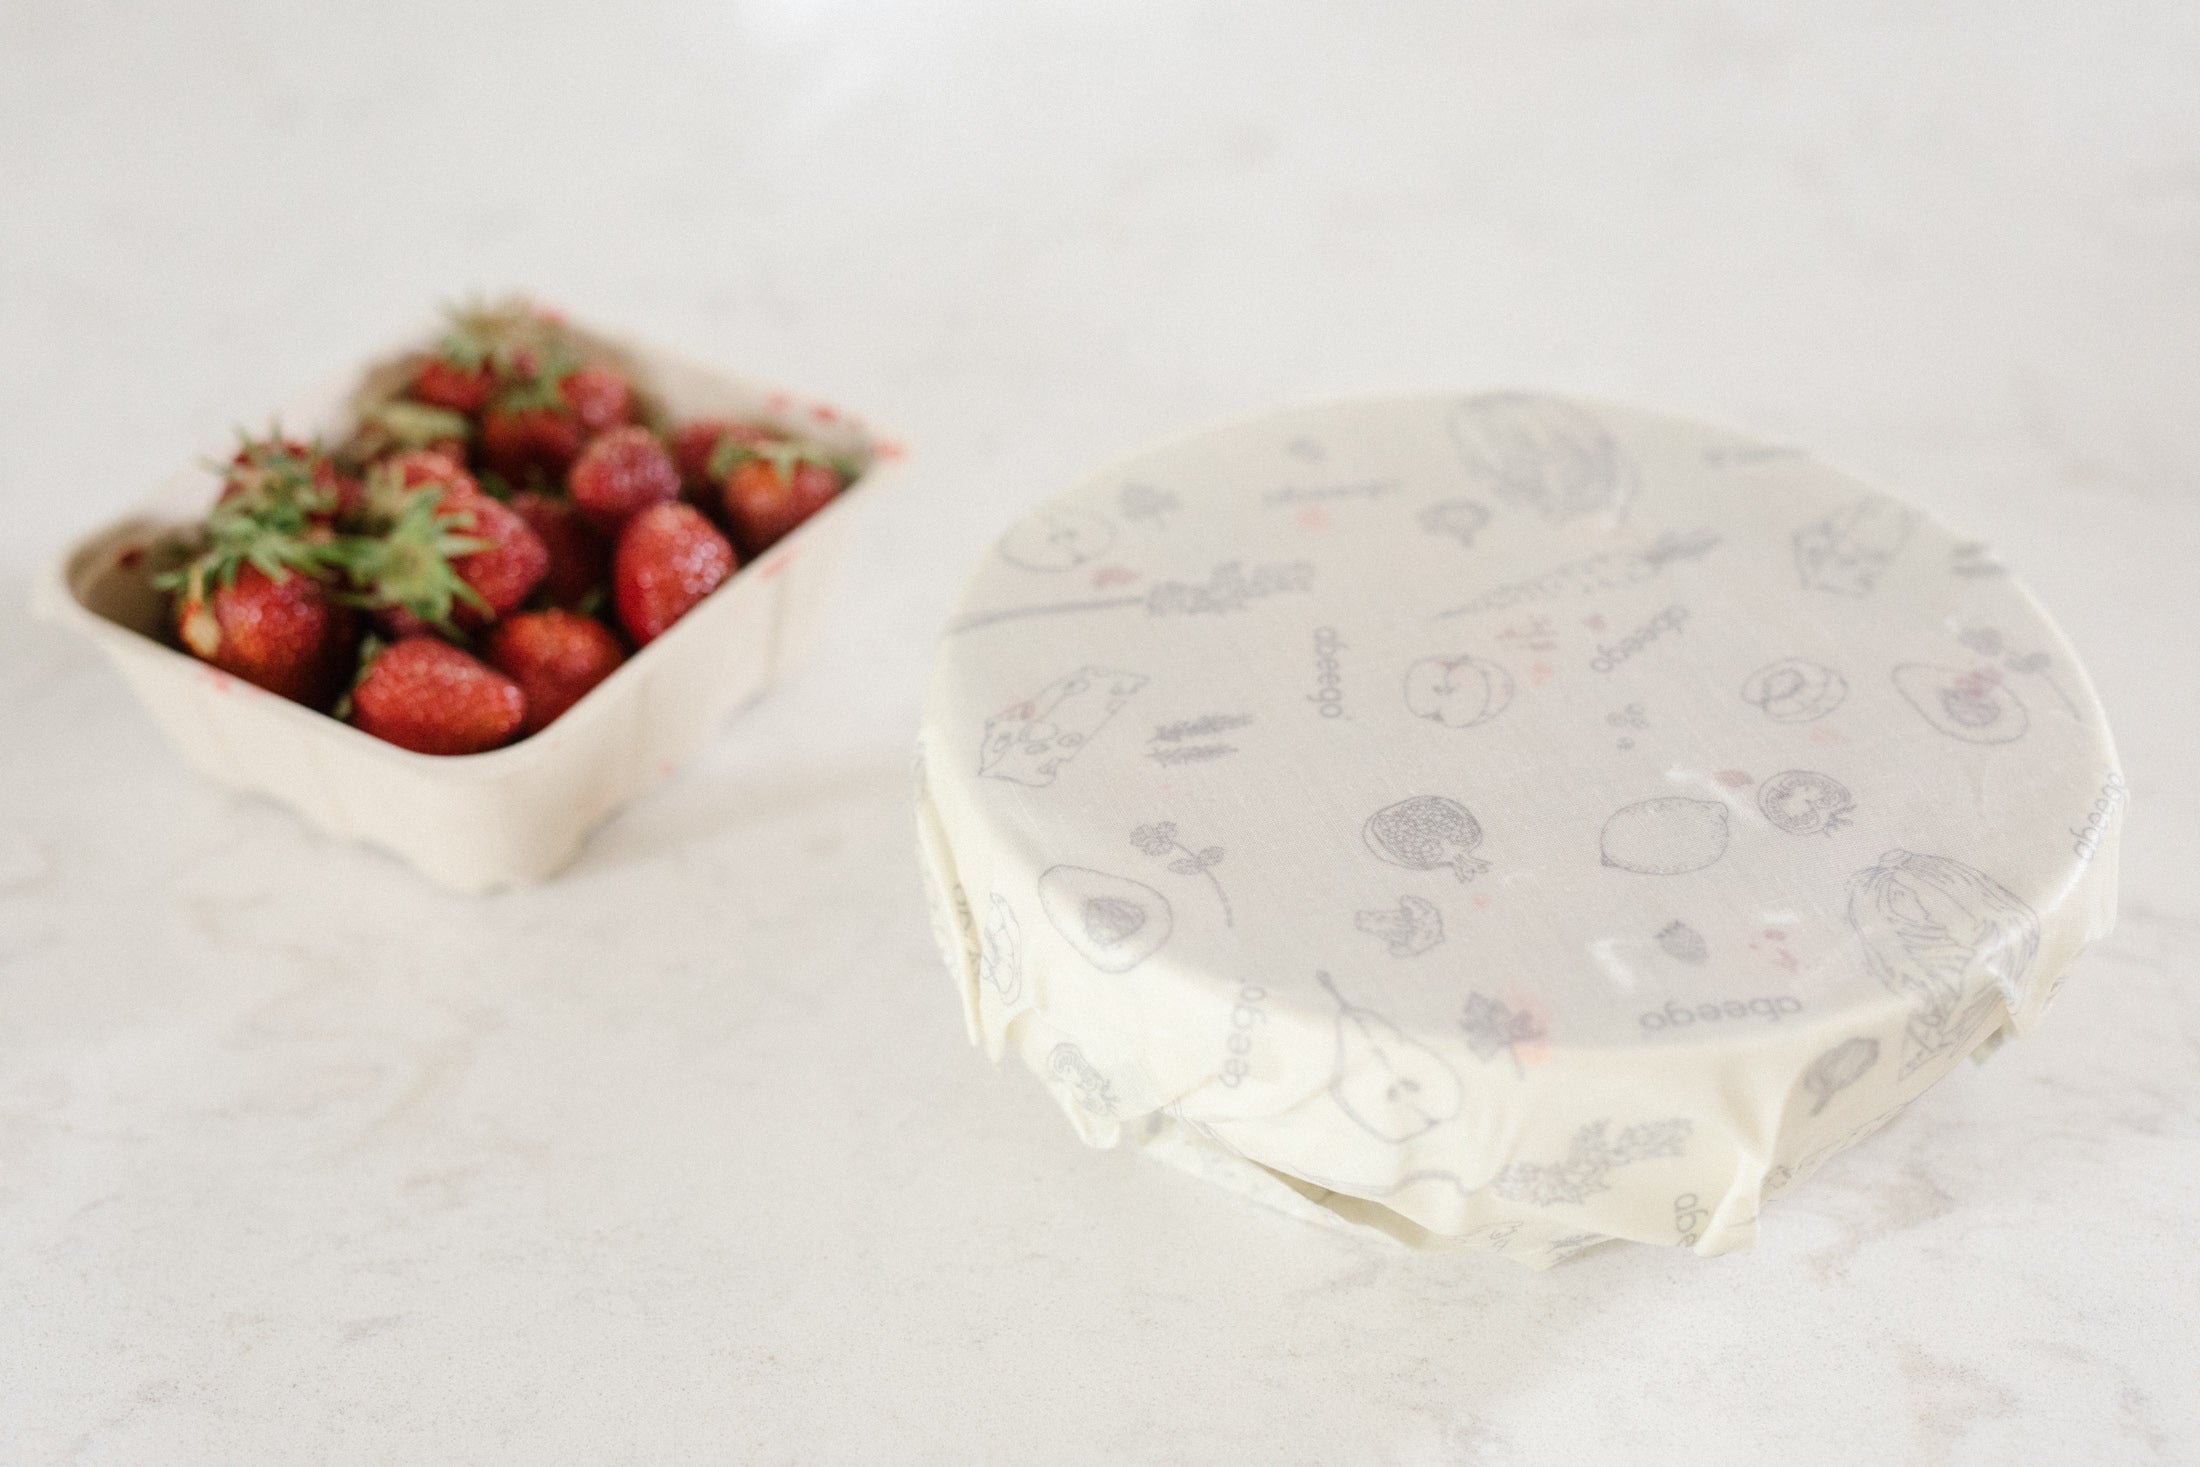 Cover a bowl with Abeego wraps to keep strawberries fresh